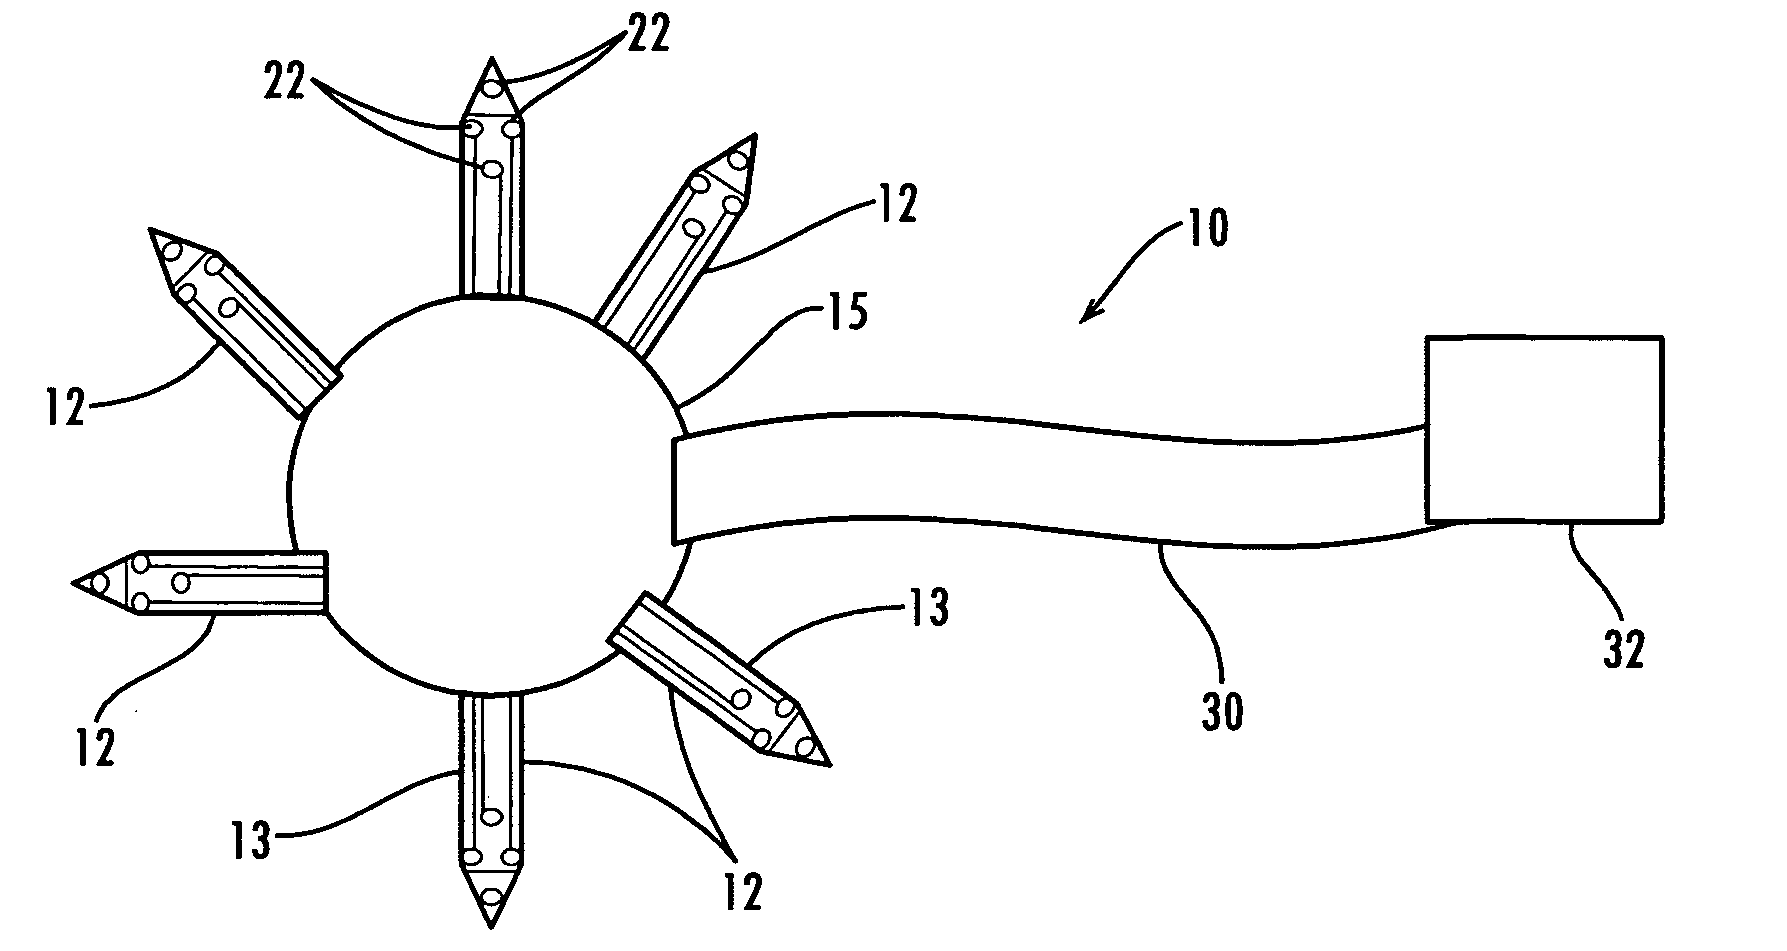 Neural interface assembly and method for making and implanting the same